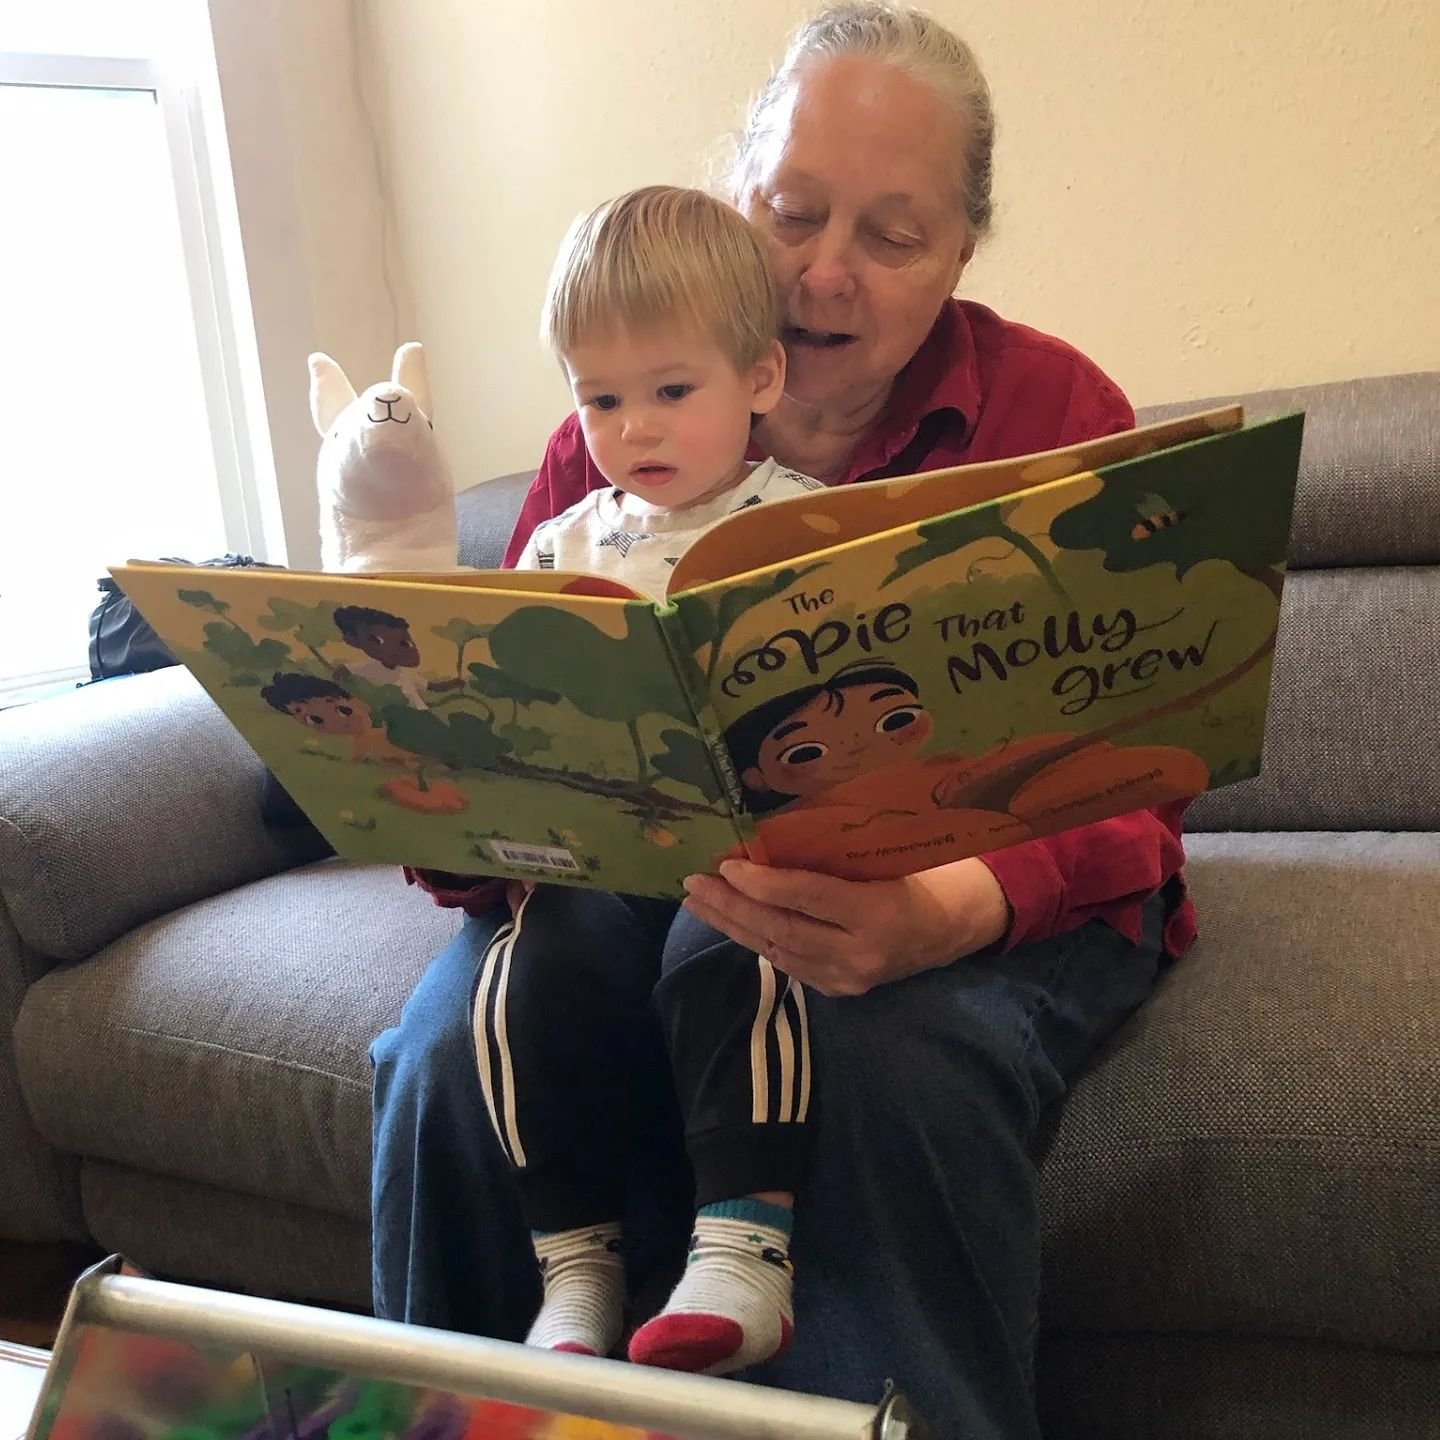 This is my mama and my nephew reading a book I illustrated (The Pie that Molly Grew, by Sue Heavenrich). I can't quite describe the joy I feel when I look at this photo. Being an auntie, seeing my mom become a grandmother, both of them together readi